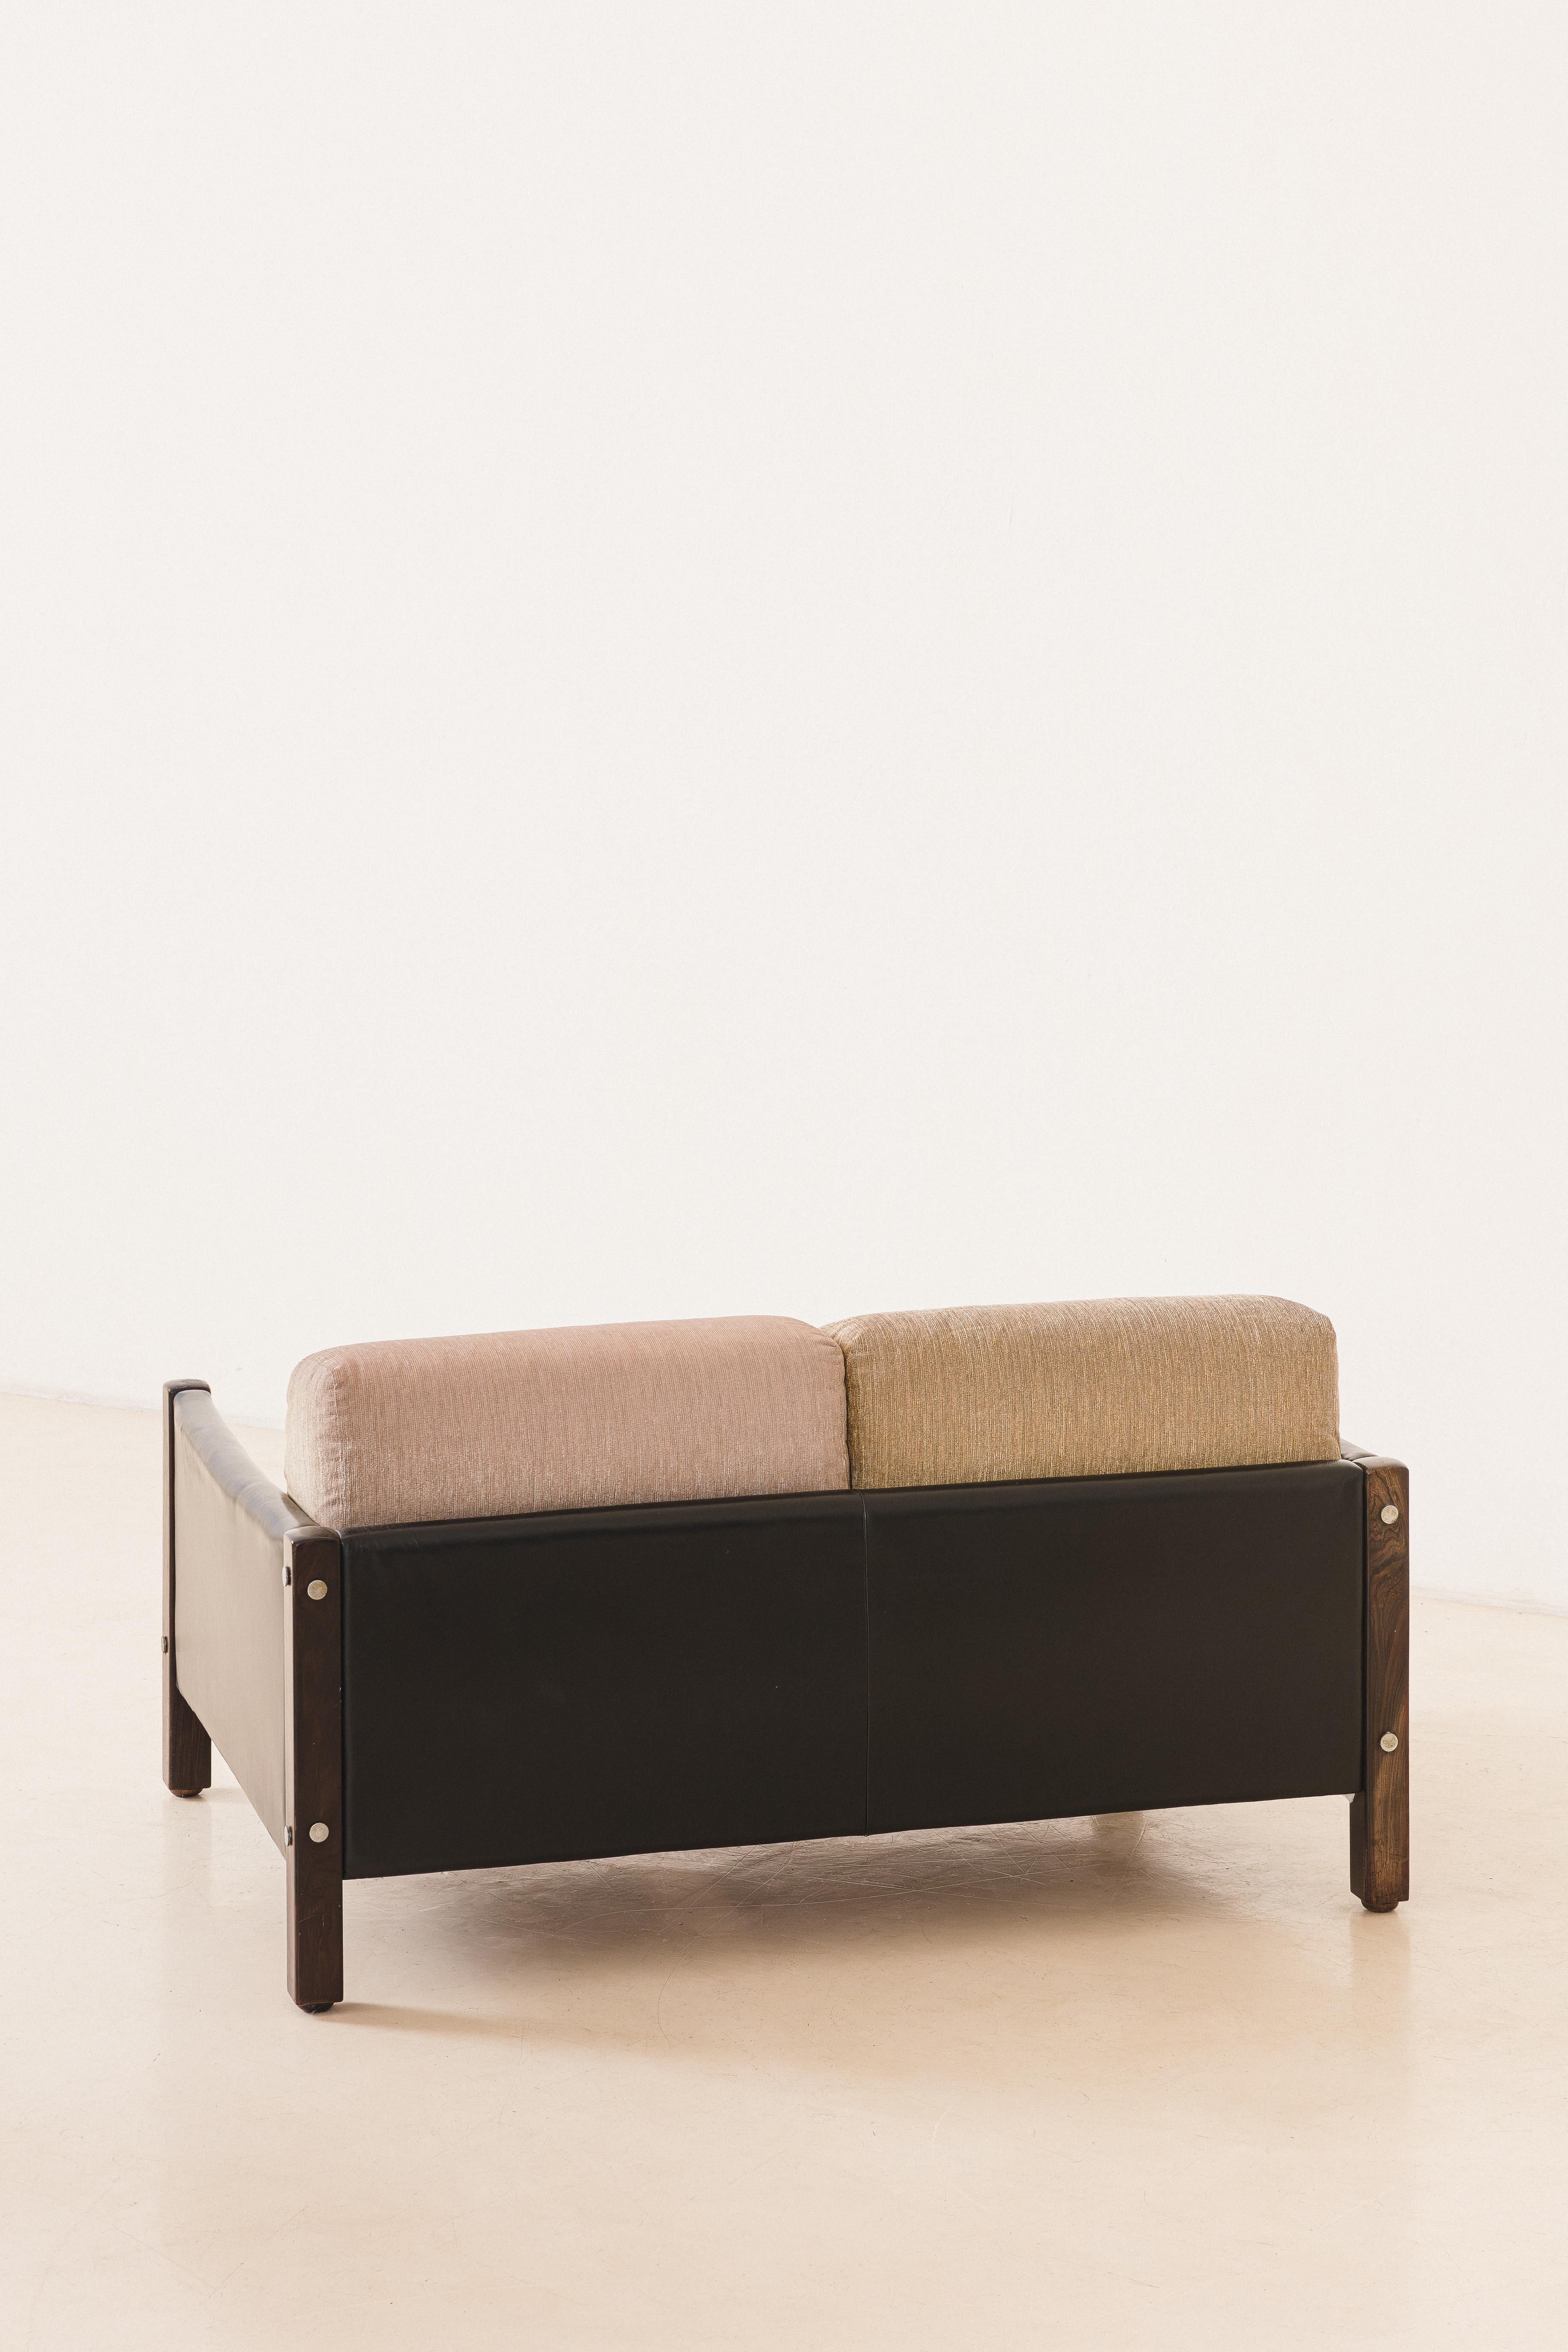 Rosewood Two-Seat Millor Sofa, Sergio Rodrigues Modern Design, Brazil, 1960s For Sale 2